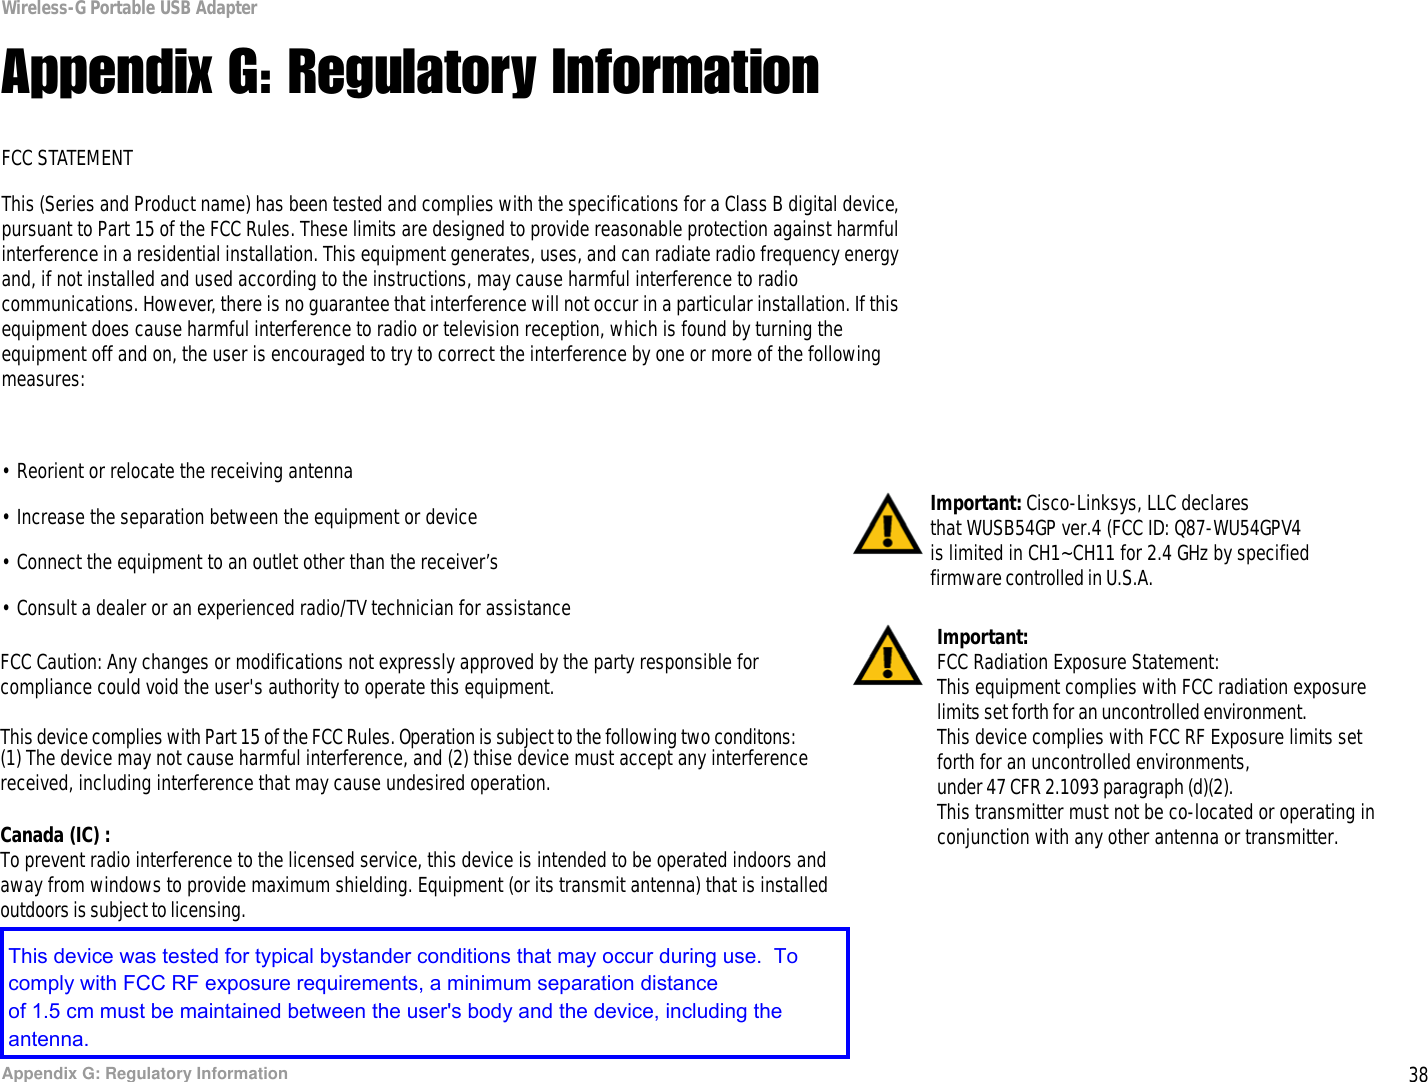 38Appendix G: Regulatory InformationWireless-G Portable USB AdapterAppendix G: Regulatory InformationFCC STATEMENTThis (Series and Product name) has been tested and complies with the specifications for a Class B digital device, pursuant to Part 15 of the FCC Rules. These limits are designed to provide reasonable protection against harmful interference in a residential installation. This equipment generates, uses, and can radiate radio frequency energy and, if not installed and used according to the instructions, may cause harmful interference to radio communications. However, there is no guarantee that interference will not occur in a particular installation. If this equipment does cause harmful interference to radio or television reception, which is found by turning the equipment off and on, the user is encouraged to try to correct the interference by one or more of the following measures:• Reorient or relocate the receiving antenna• Increase the separation between the equipment or device• Connect the equipment to an outlet other than the receiver’s• Consult a dealer or an experienced radio/TV technician for assistanceImportant: Cisco-Linksys, LLC declares that WUSB54GP ver.4 (FCC ID: Q87-WU54GPV4is limited in CH1~CH11 for 2.4 GHz by specified  firmware controlled in U.S.A. FCC Caution: Any changes or modifications not expressly approved by the party responsible for  compliance could void the user&apos;s authority to operate this equipment.This device complies with Part 15 of the FCC Rules. Operation is subject to the following two conditons:Important:  FCC Radiation Exposure Statement:This equipment complies with FCC radiation exposure limits set forth for an uncontrolled environment.This device complies with FCC RF Exposure limits setforth for an uncontrolled environments, under 47 CFR 2.1093 paragraph (d)(2). This transmitter must not be co-located or operating inconjunction with any other antenna or transmitter. (1) The device may not cause harmful interference, and (2) thise device must accept any interferencereceived, including interference that may cause undesired operation.  Canada (IC) :  To prevent radio interference to the licensed service, this device is intended to be operated indoors and away from windows to provide maximum shielding. Equipment (or its transmit antenna) that is installed  outdoors is subject to licensing.This device was tested for typical bystander conditions that may occur during use.  To comply with FCC RF exposure requirements, a minimum separation distanceof 1.5 cm must be maintained between the user&apos;s body and the device, including the antenna.